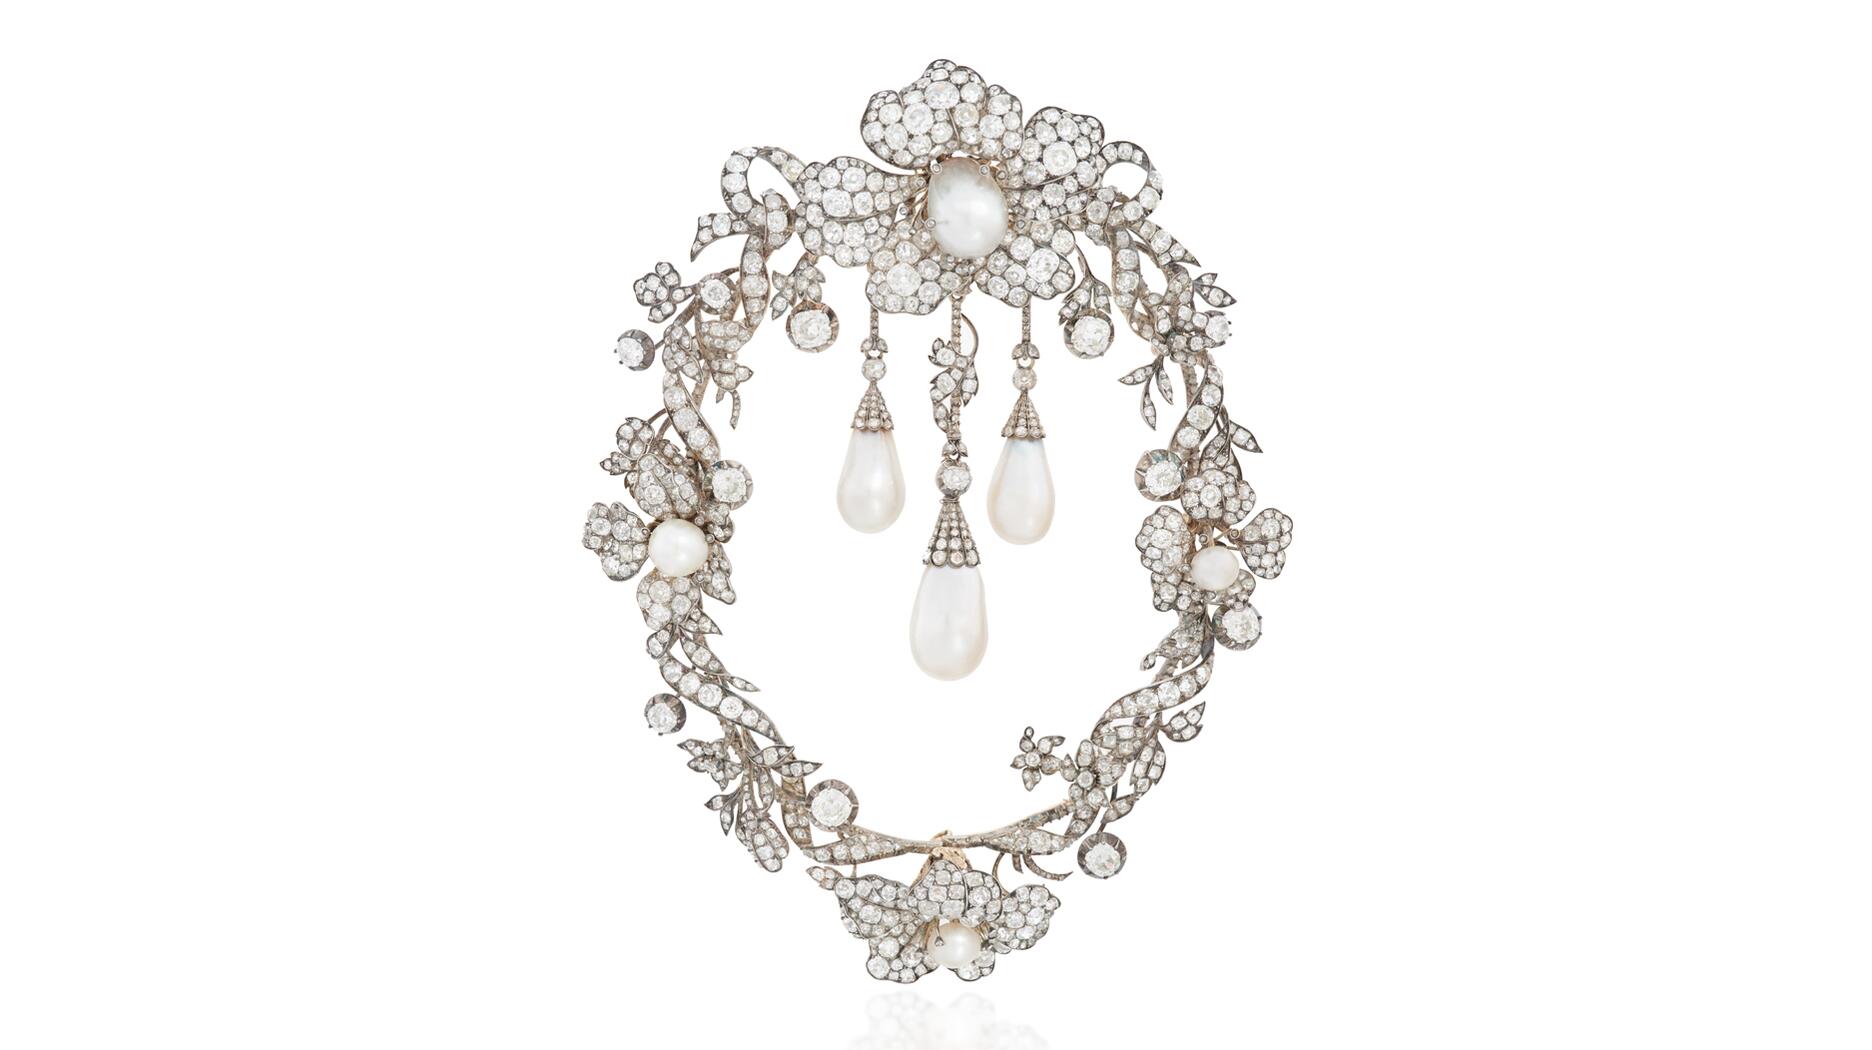 Sotheby’s Geneva Vienna 1900: An Imperial and Royal Collection diamond and pearl corsage ornament 